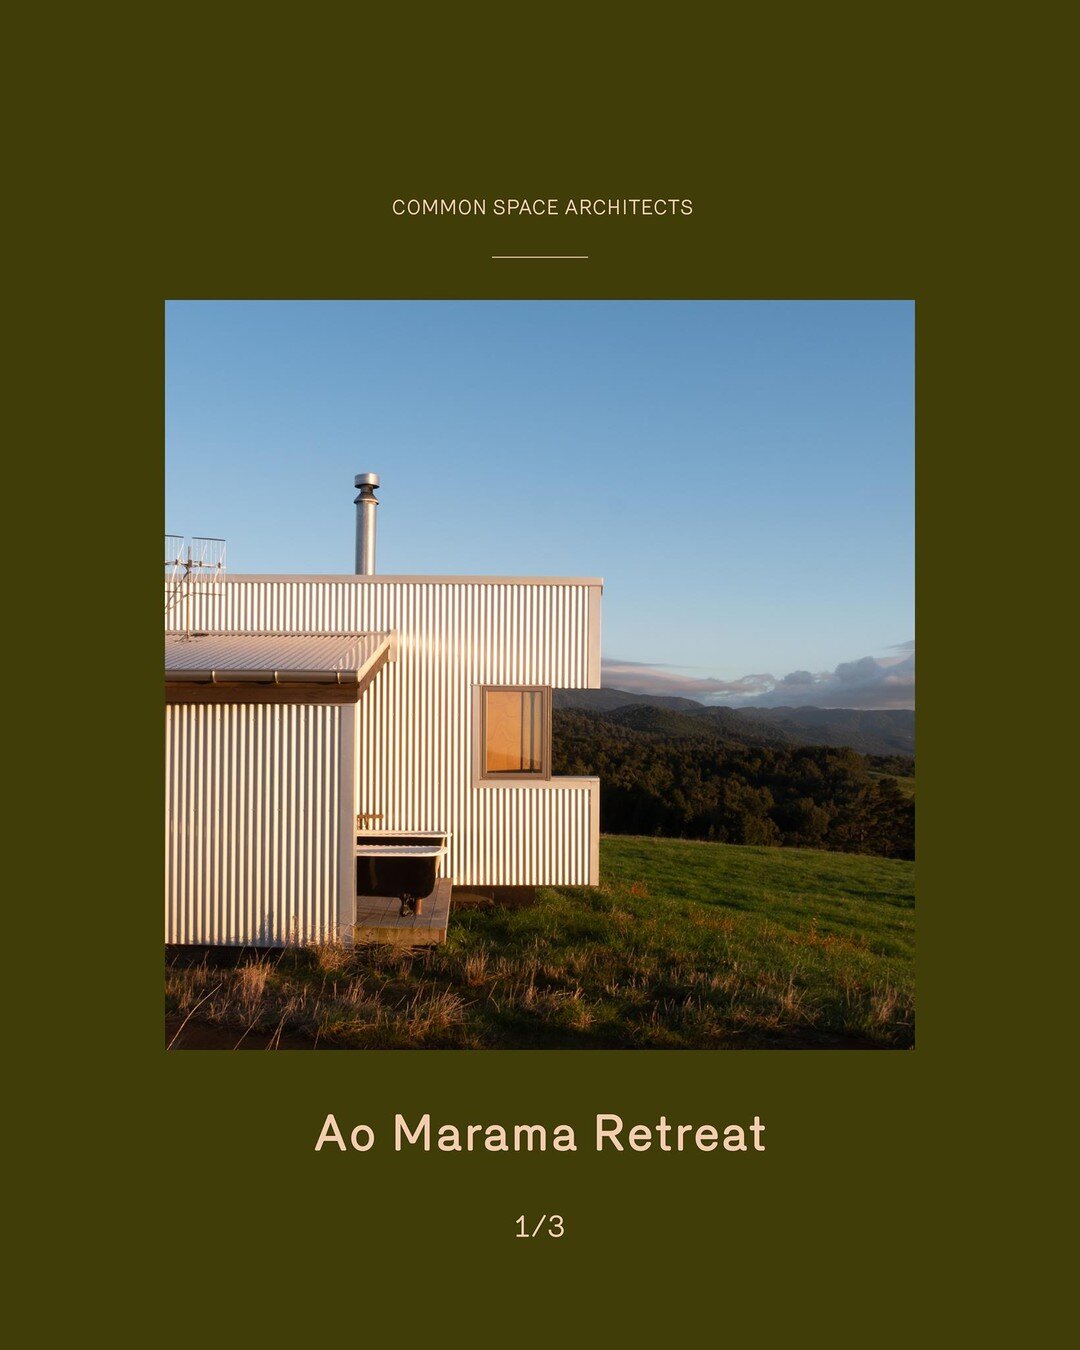 Ao Marama Retreat 1/3⁠
⁠
&ldquo;This truly rustic retreat invokes the collective Kiwi memory of remote huts and simple comfort. The quintessential hut is reinvented by the architect via an elegantly articulated vernacular form and structure.&rdquo;⁠
